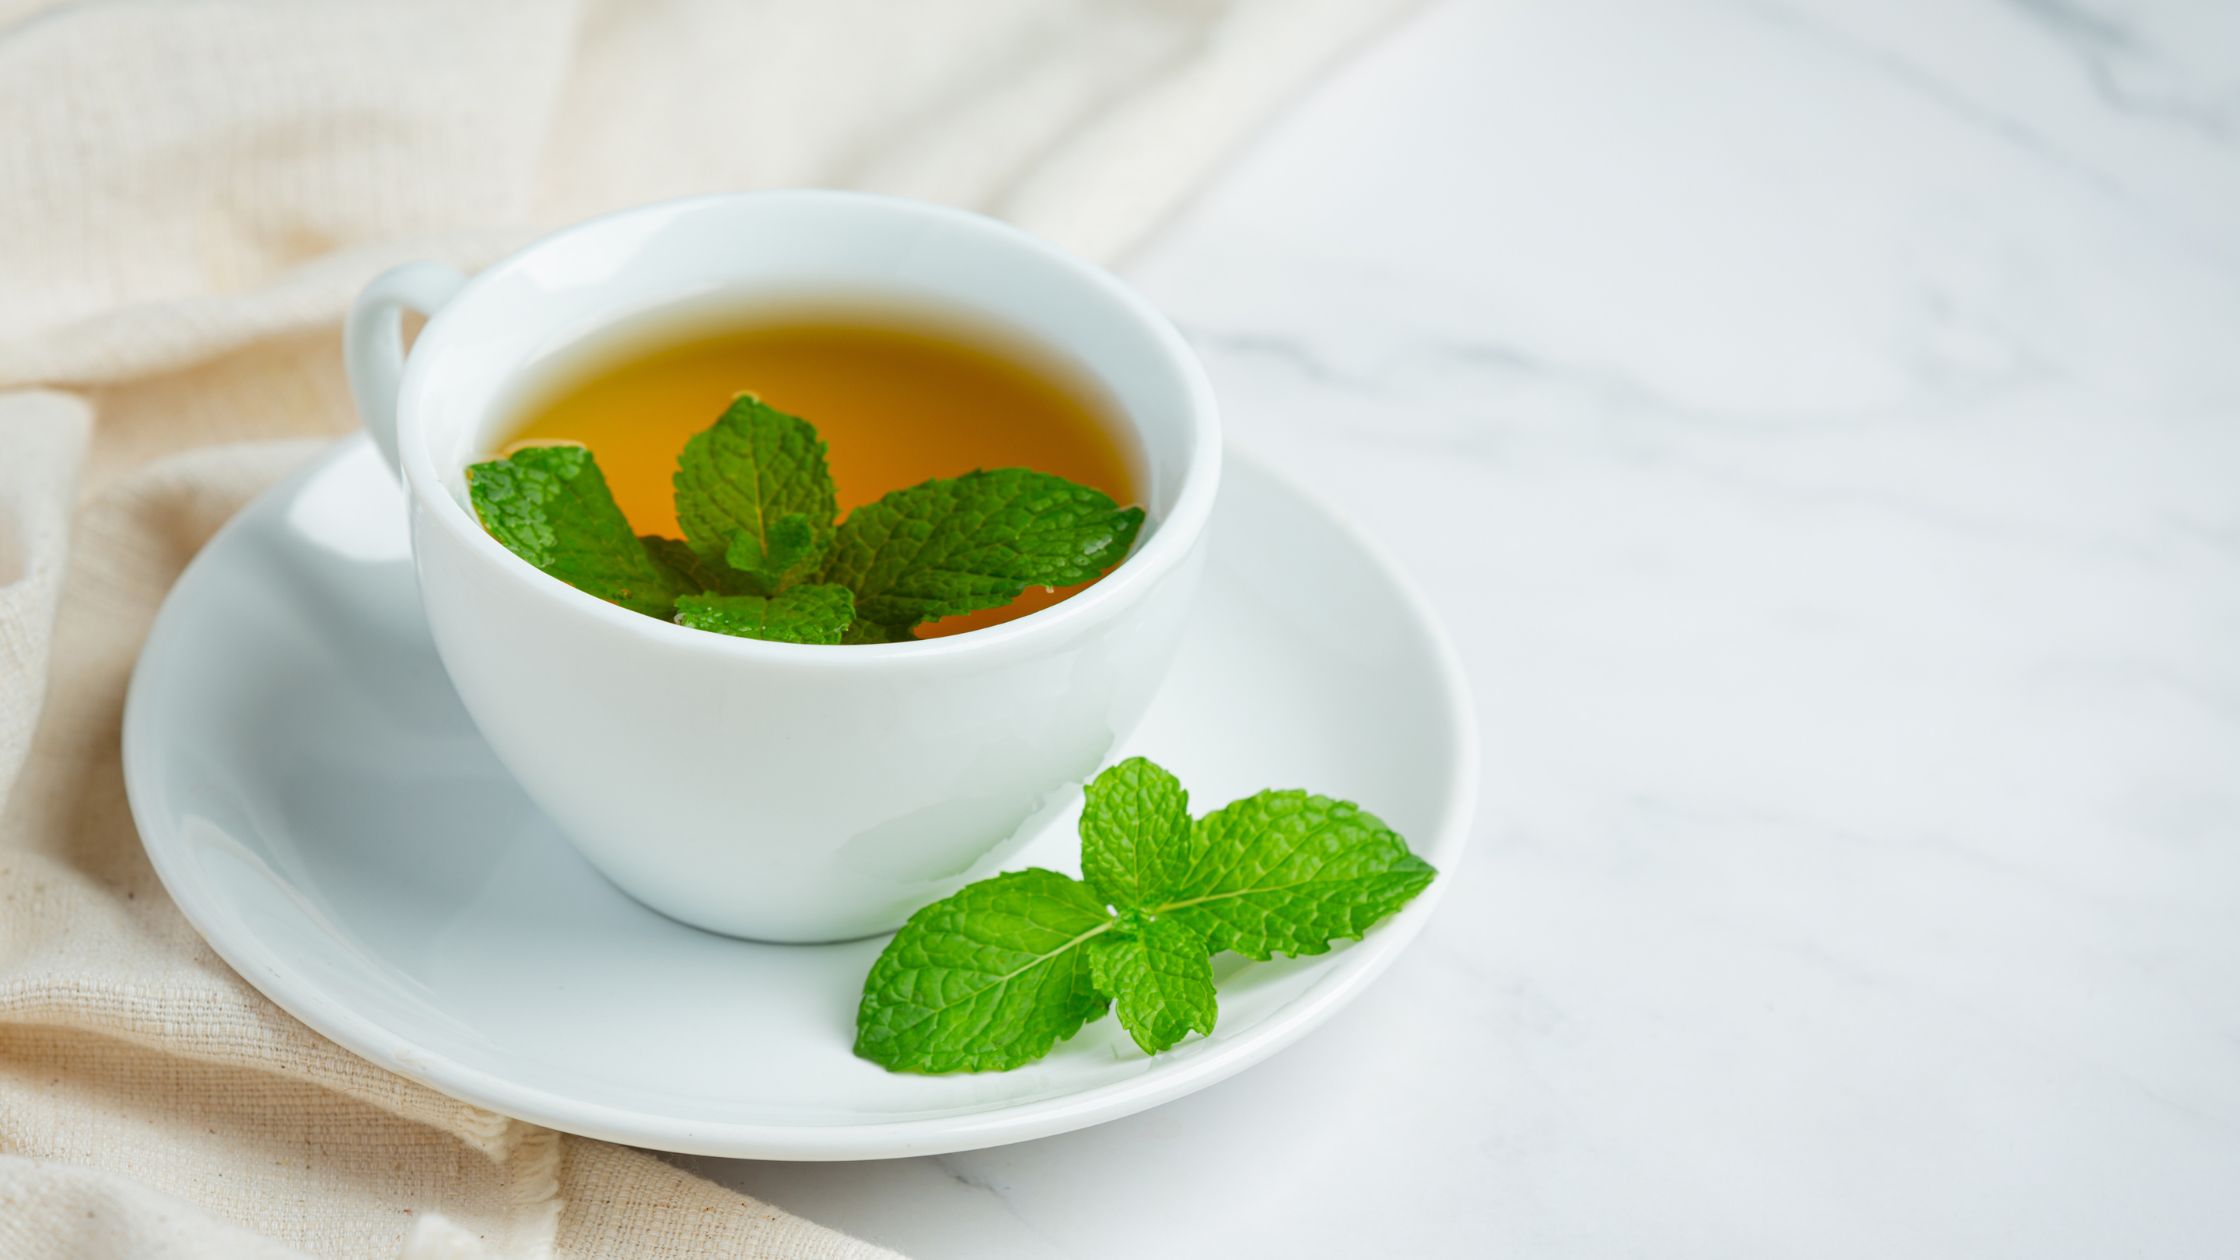 Mint tea served in a white cup and placed on a white table.